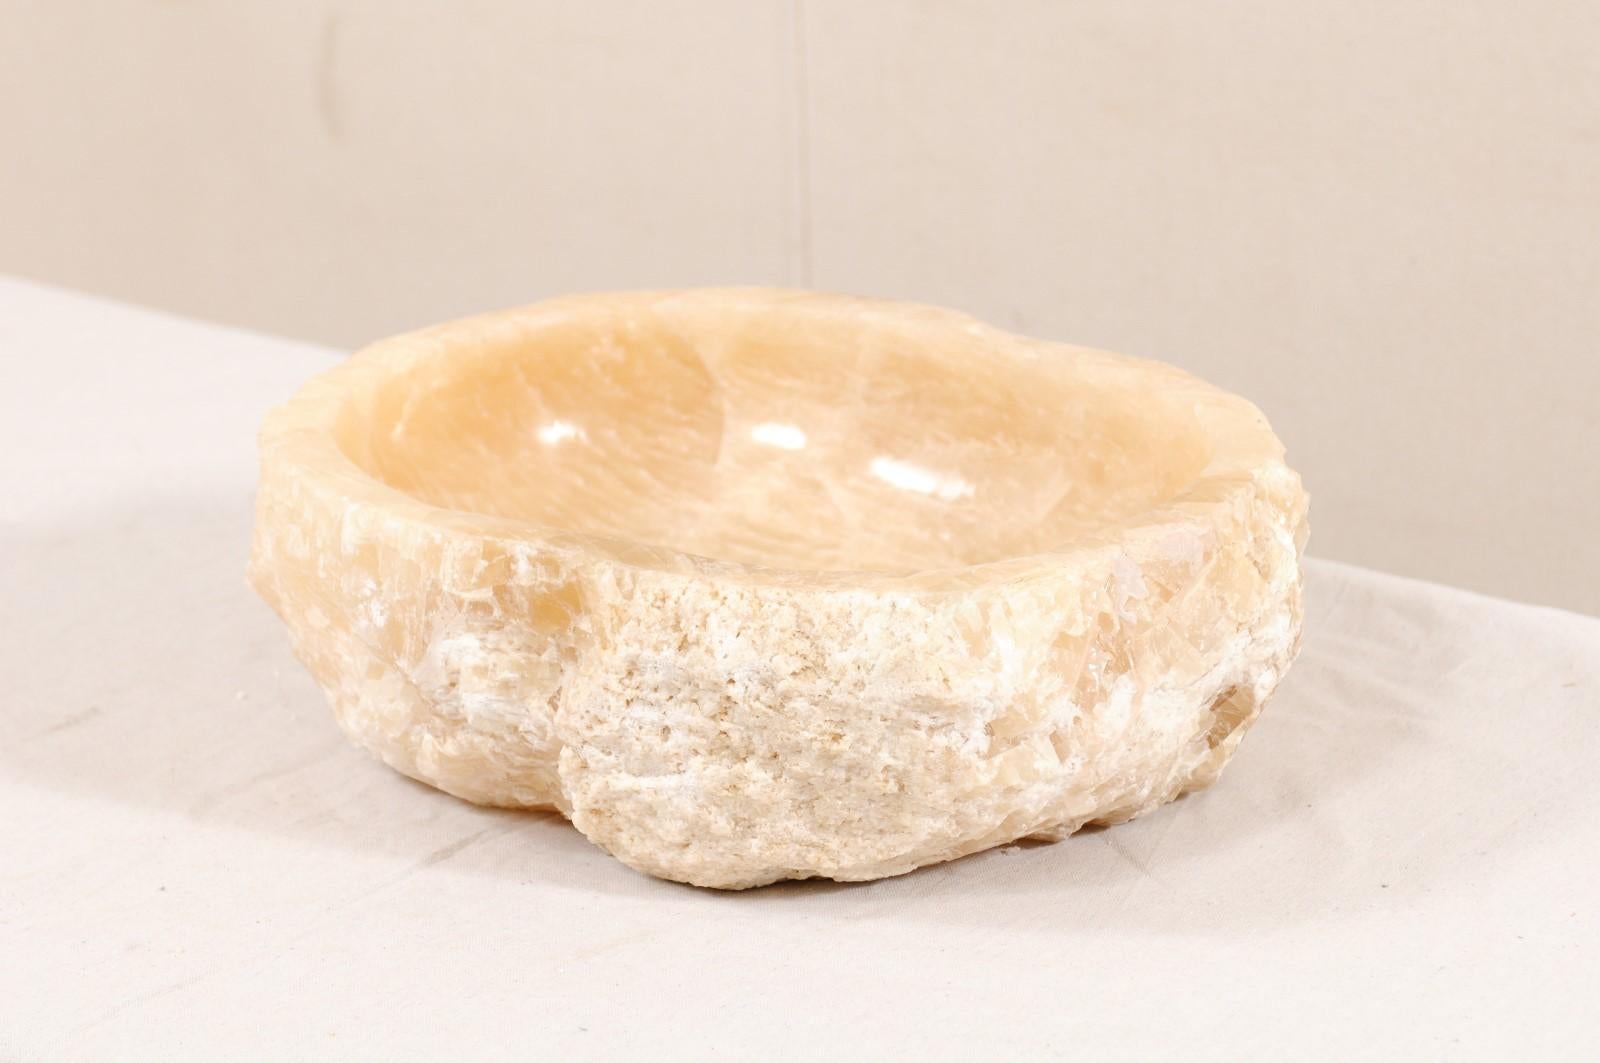 A single natural onyx sink basin with original live edge. This carved vessel sink, created from a rough onyx rock, has a carved and then polished interior basin, making for easy clean-up. The natural textured stone remains about the exterior of the